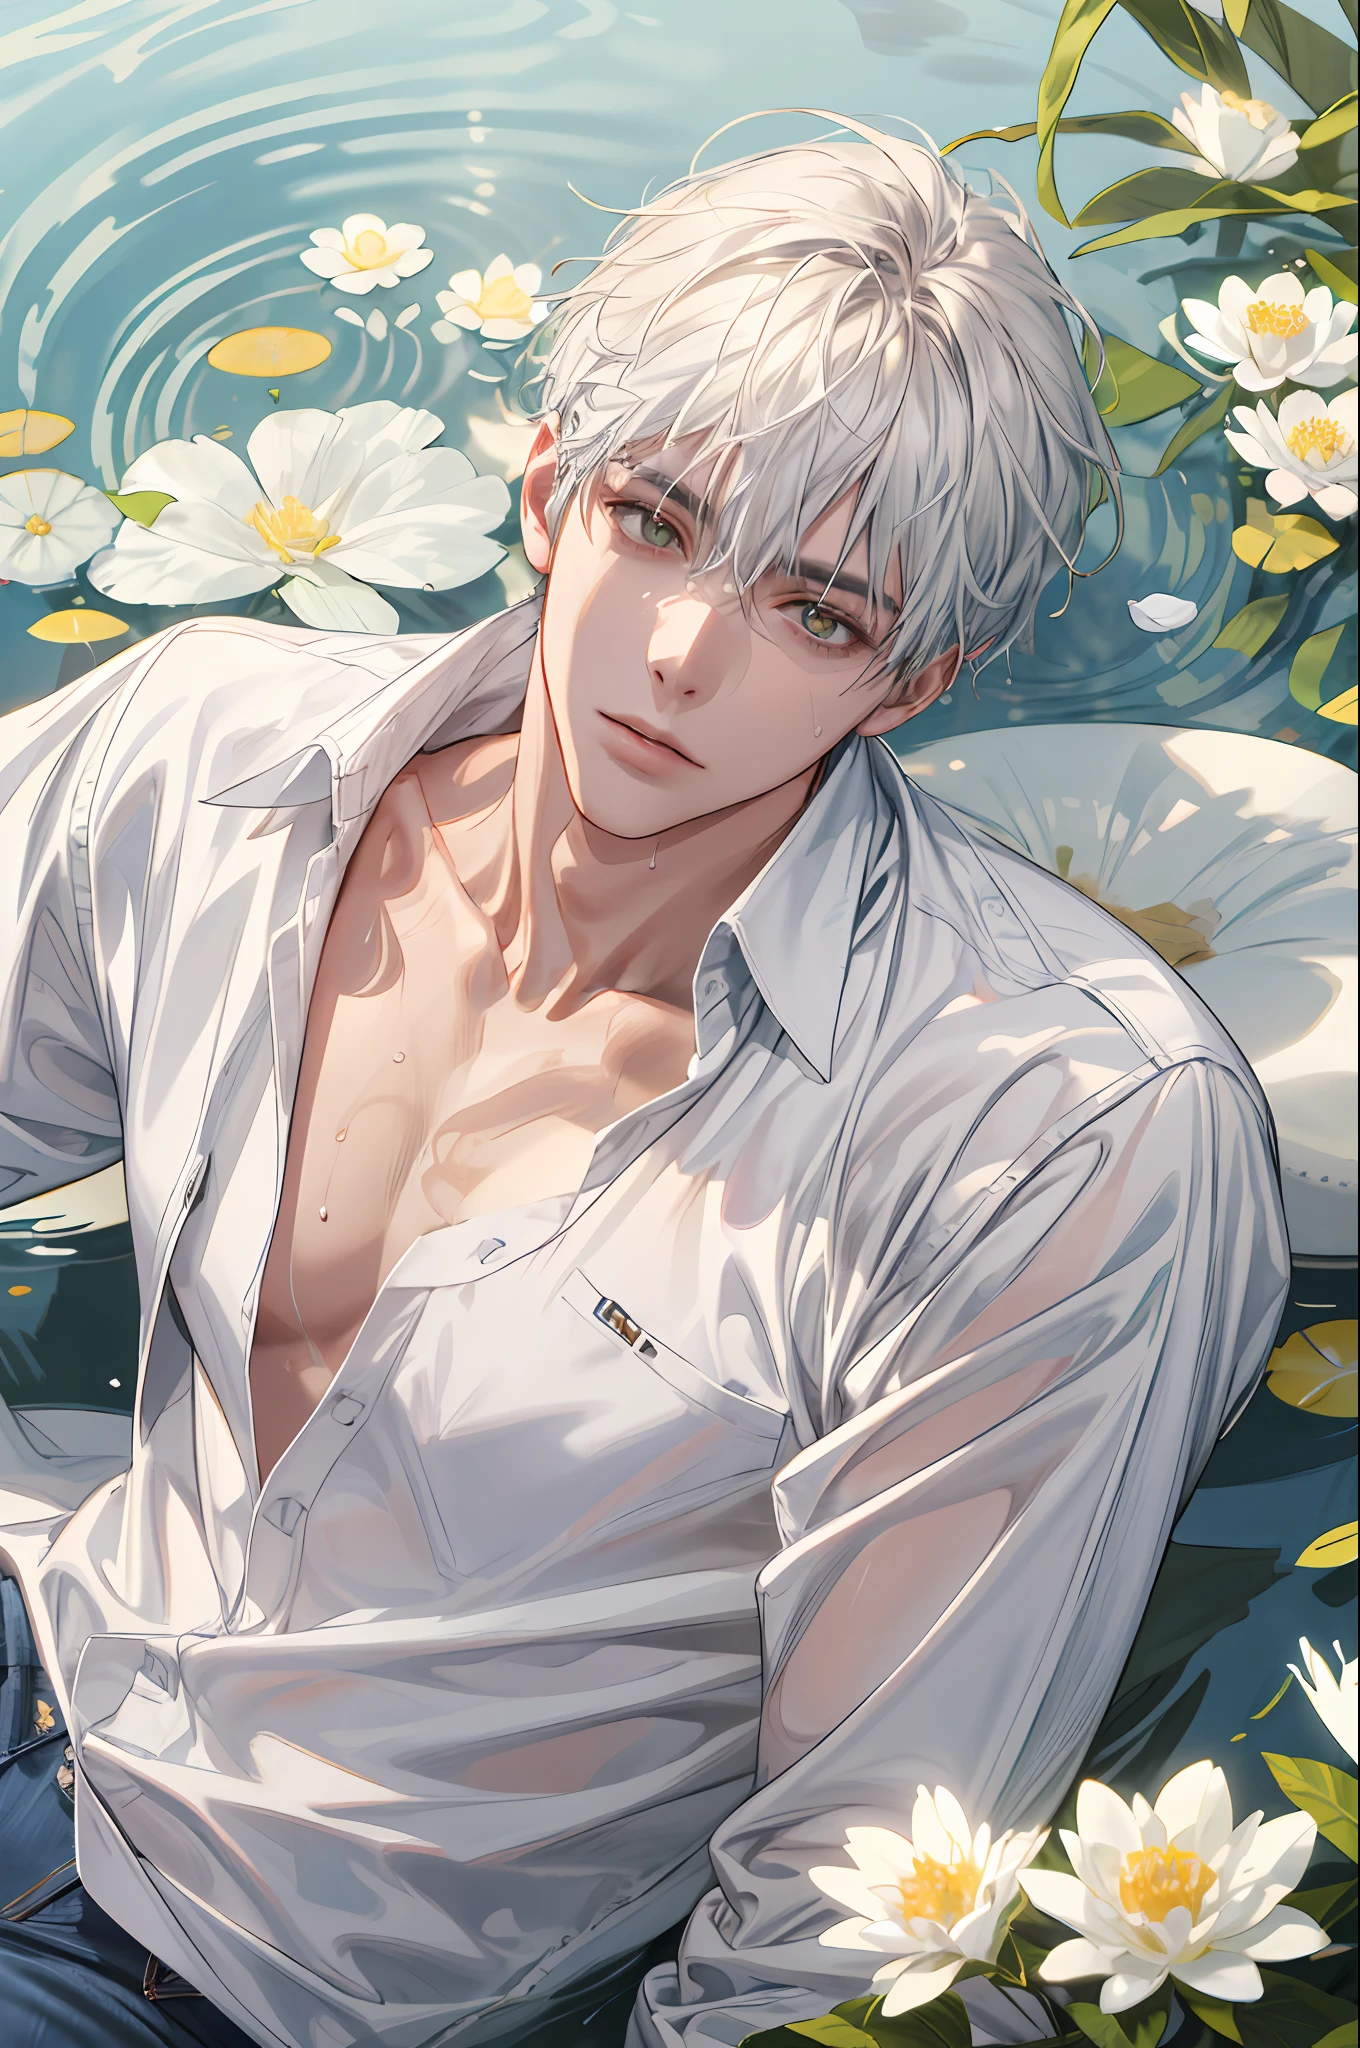 (absurdres, highres, ultra detailed), 1 male, handsome, tall muscular guy, mature, (The pond is filled with lemon slices and white flowers), A man lying on back comfortably in it, from directly above, (white shirt, jeans), wet, colorful, artistic, depth of field, focus on his face,calm facial features, lemon slices around face